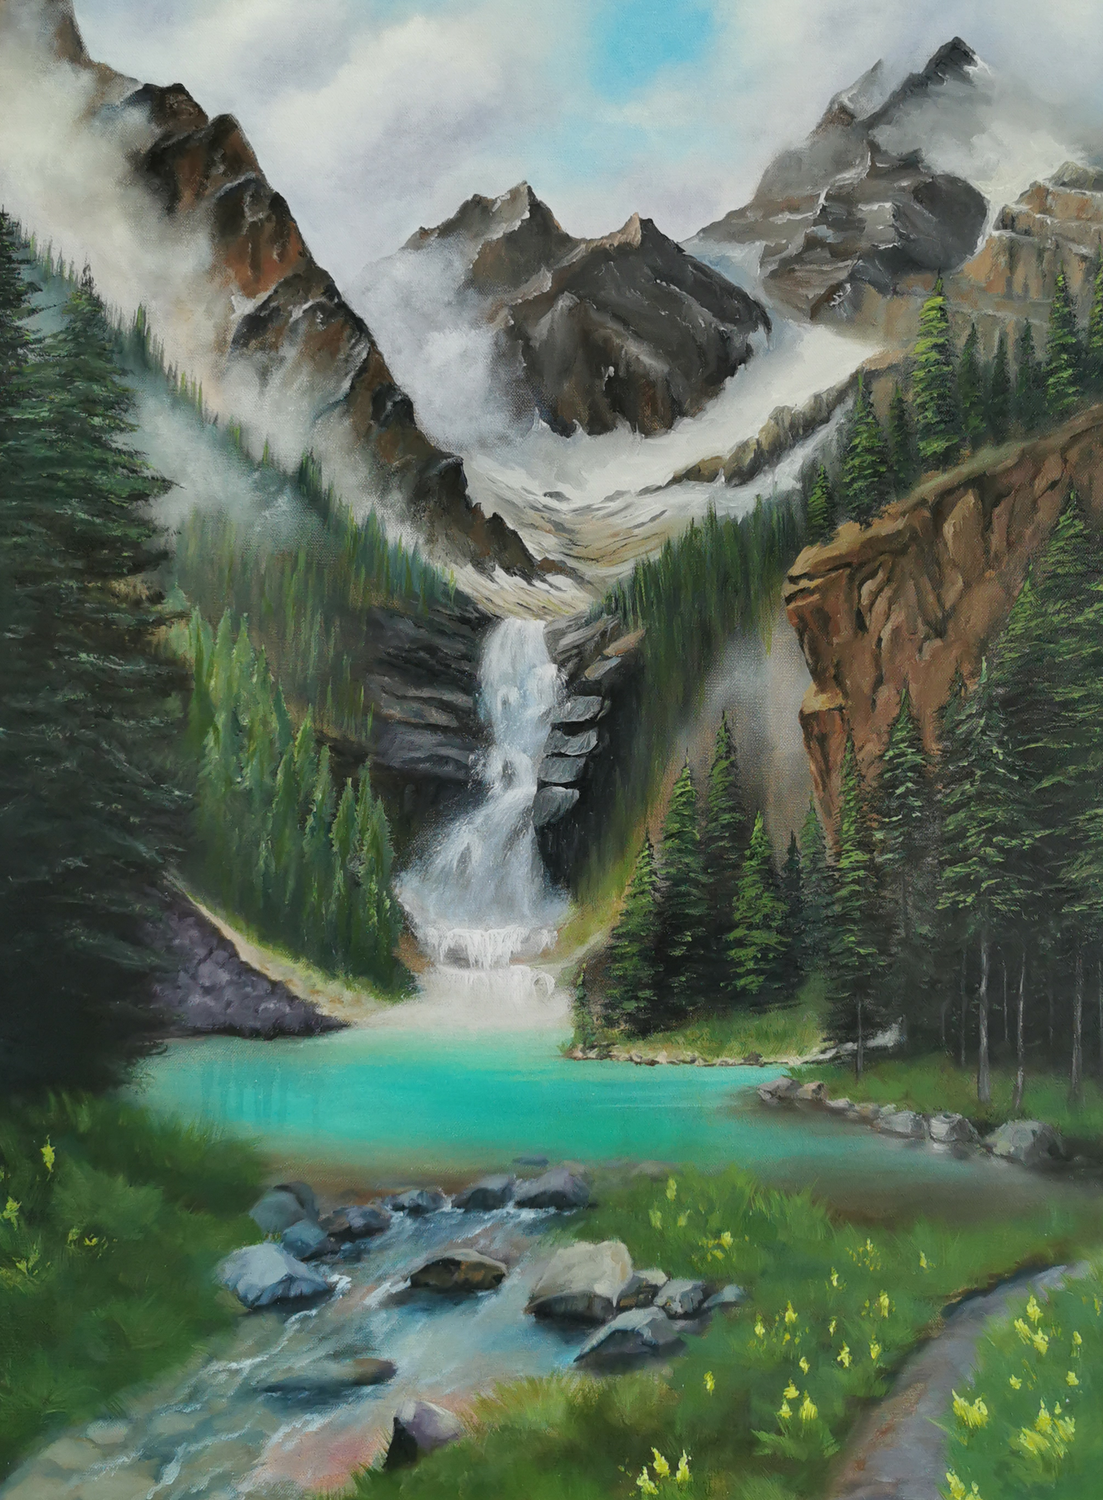 A large fine-art landscape painting of nature“, waterfall painitng, oil painting, painting for livingroom, mountains, lake, water, turquoise by Vera Hoi TRiCERA ART